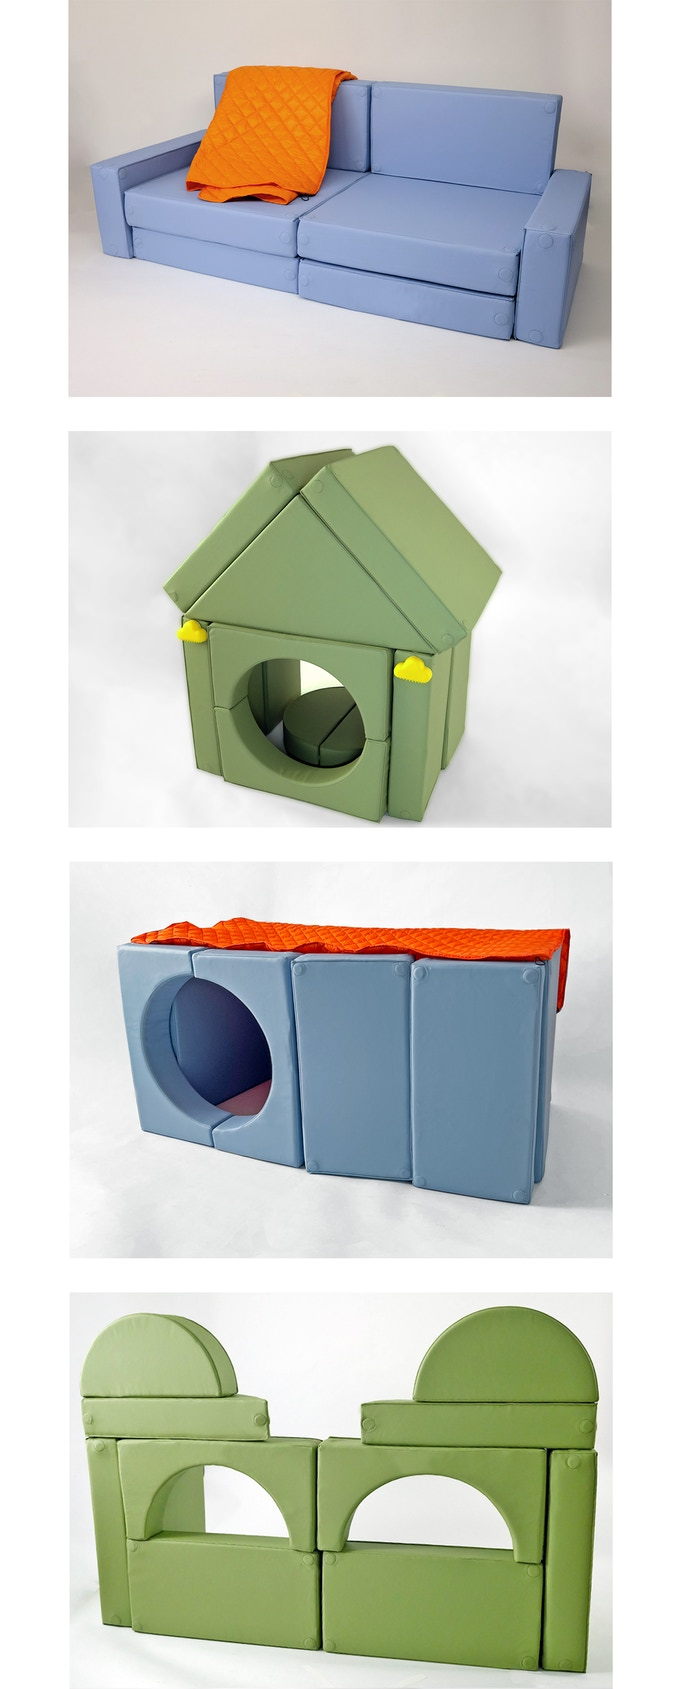 Several different configurations made using the FORT magnetic pillow fort building kit.